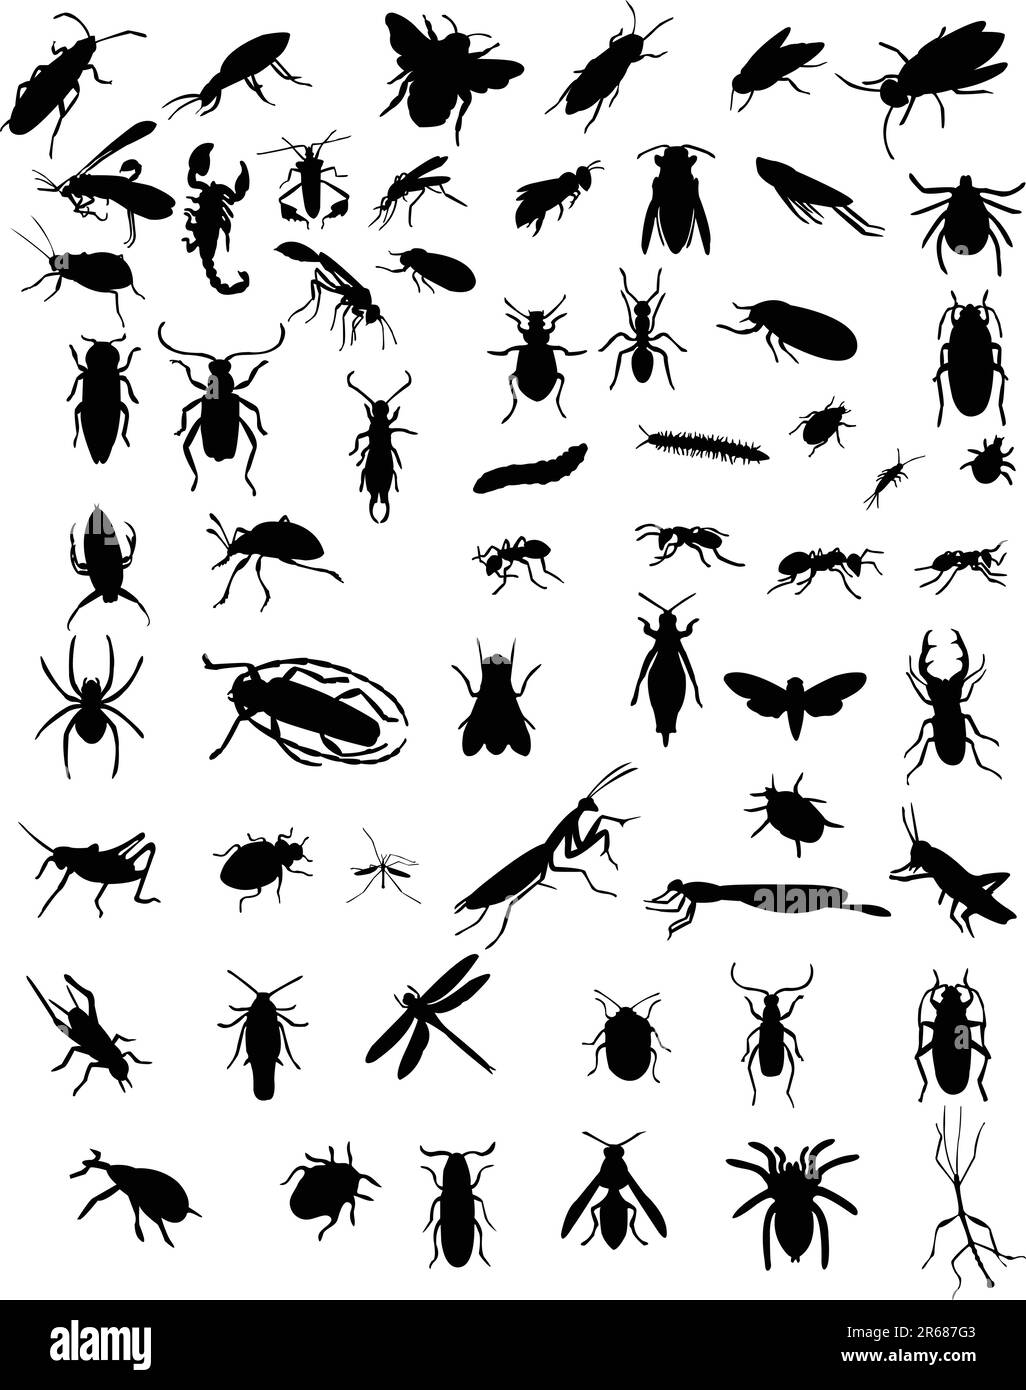 collection of 60 bugs - vector Stock Vector